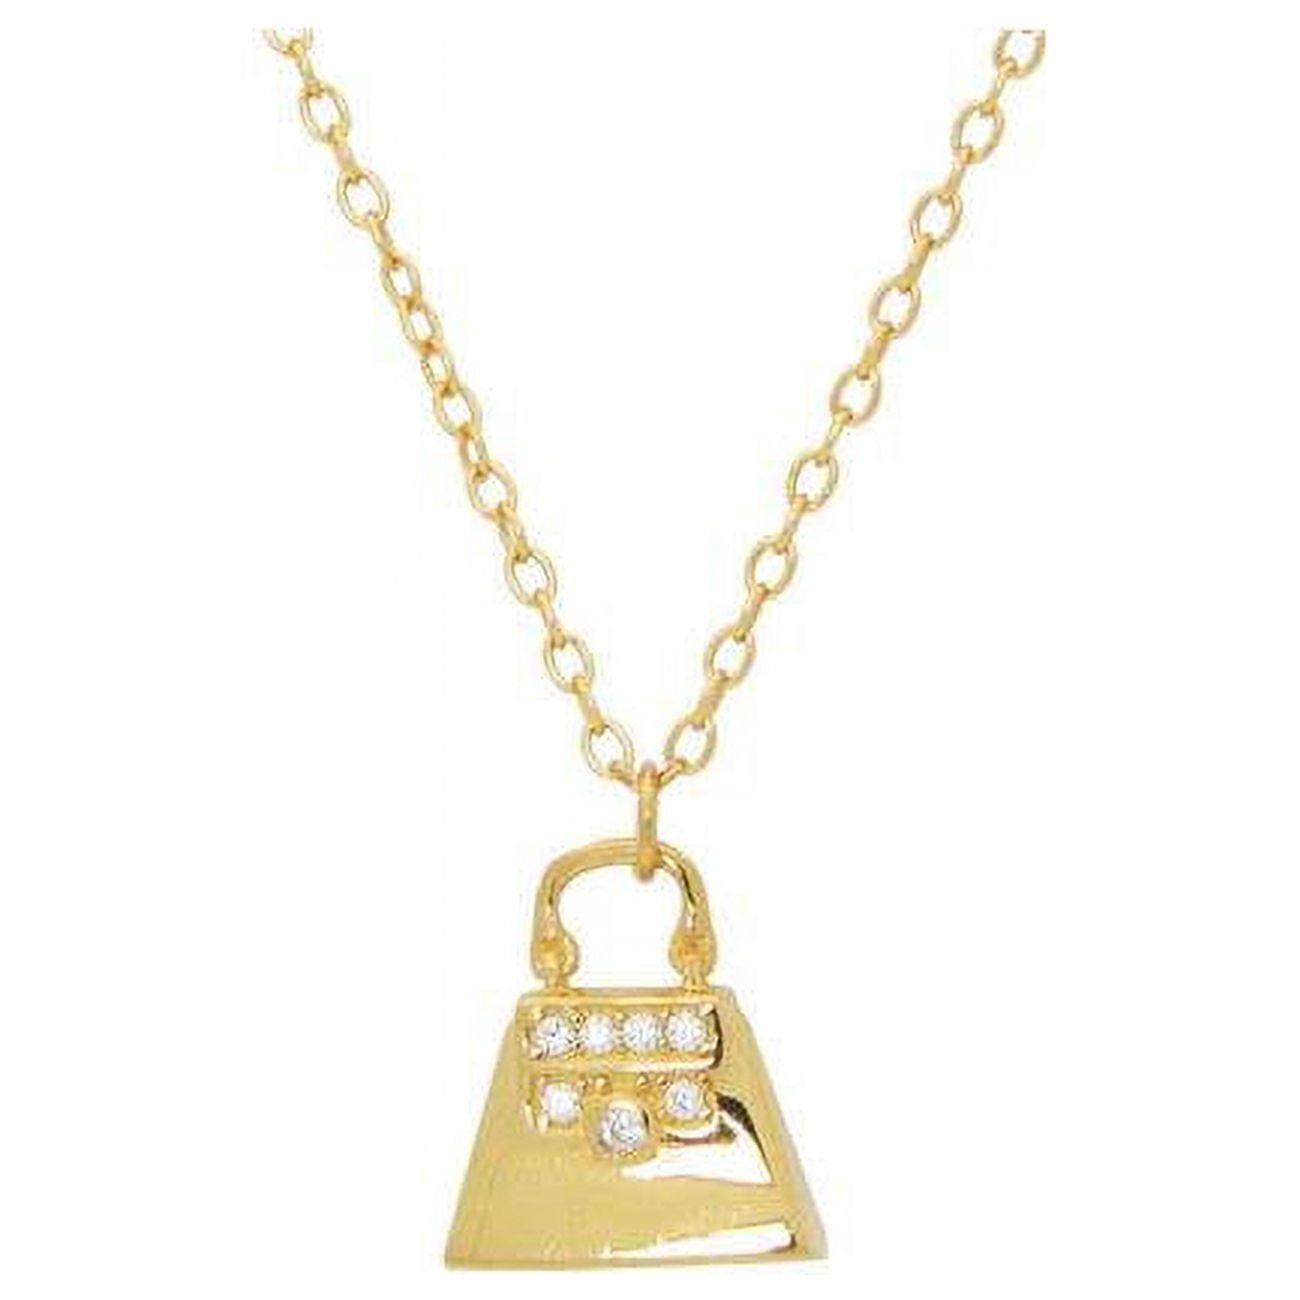 111202g 16 & 2 In. Teen Sparkling Cz Purse Pendant Necklace In Gold Plated Sterling Silver